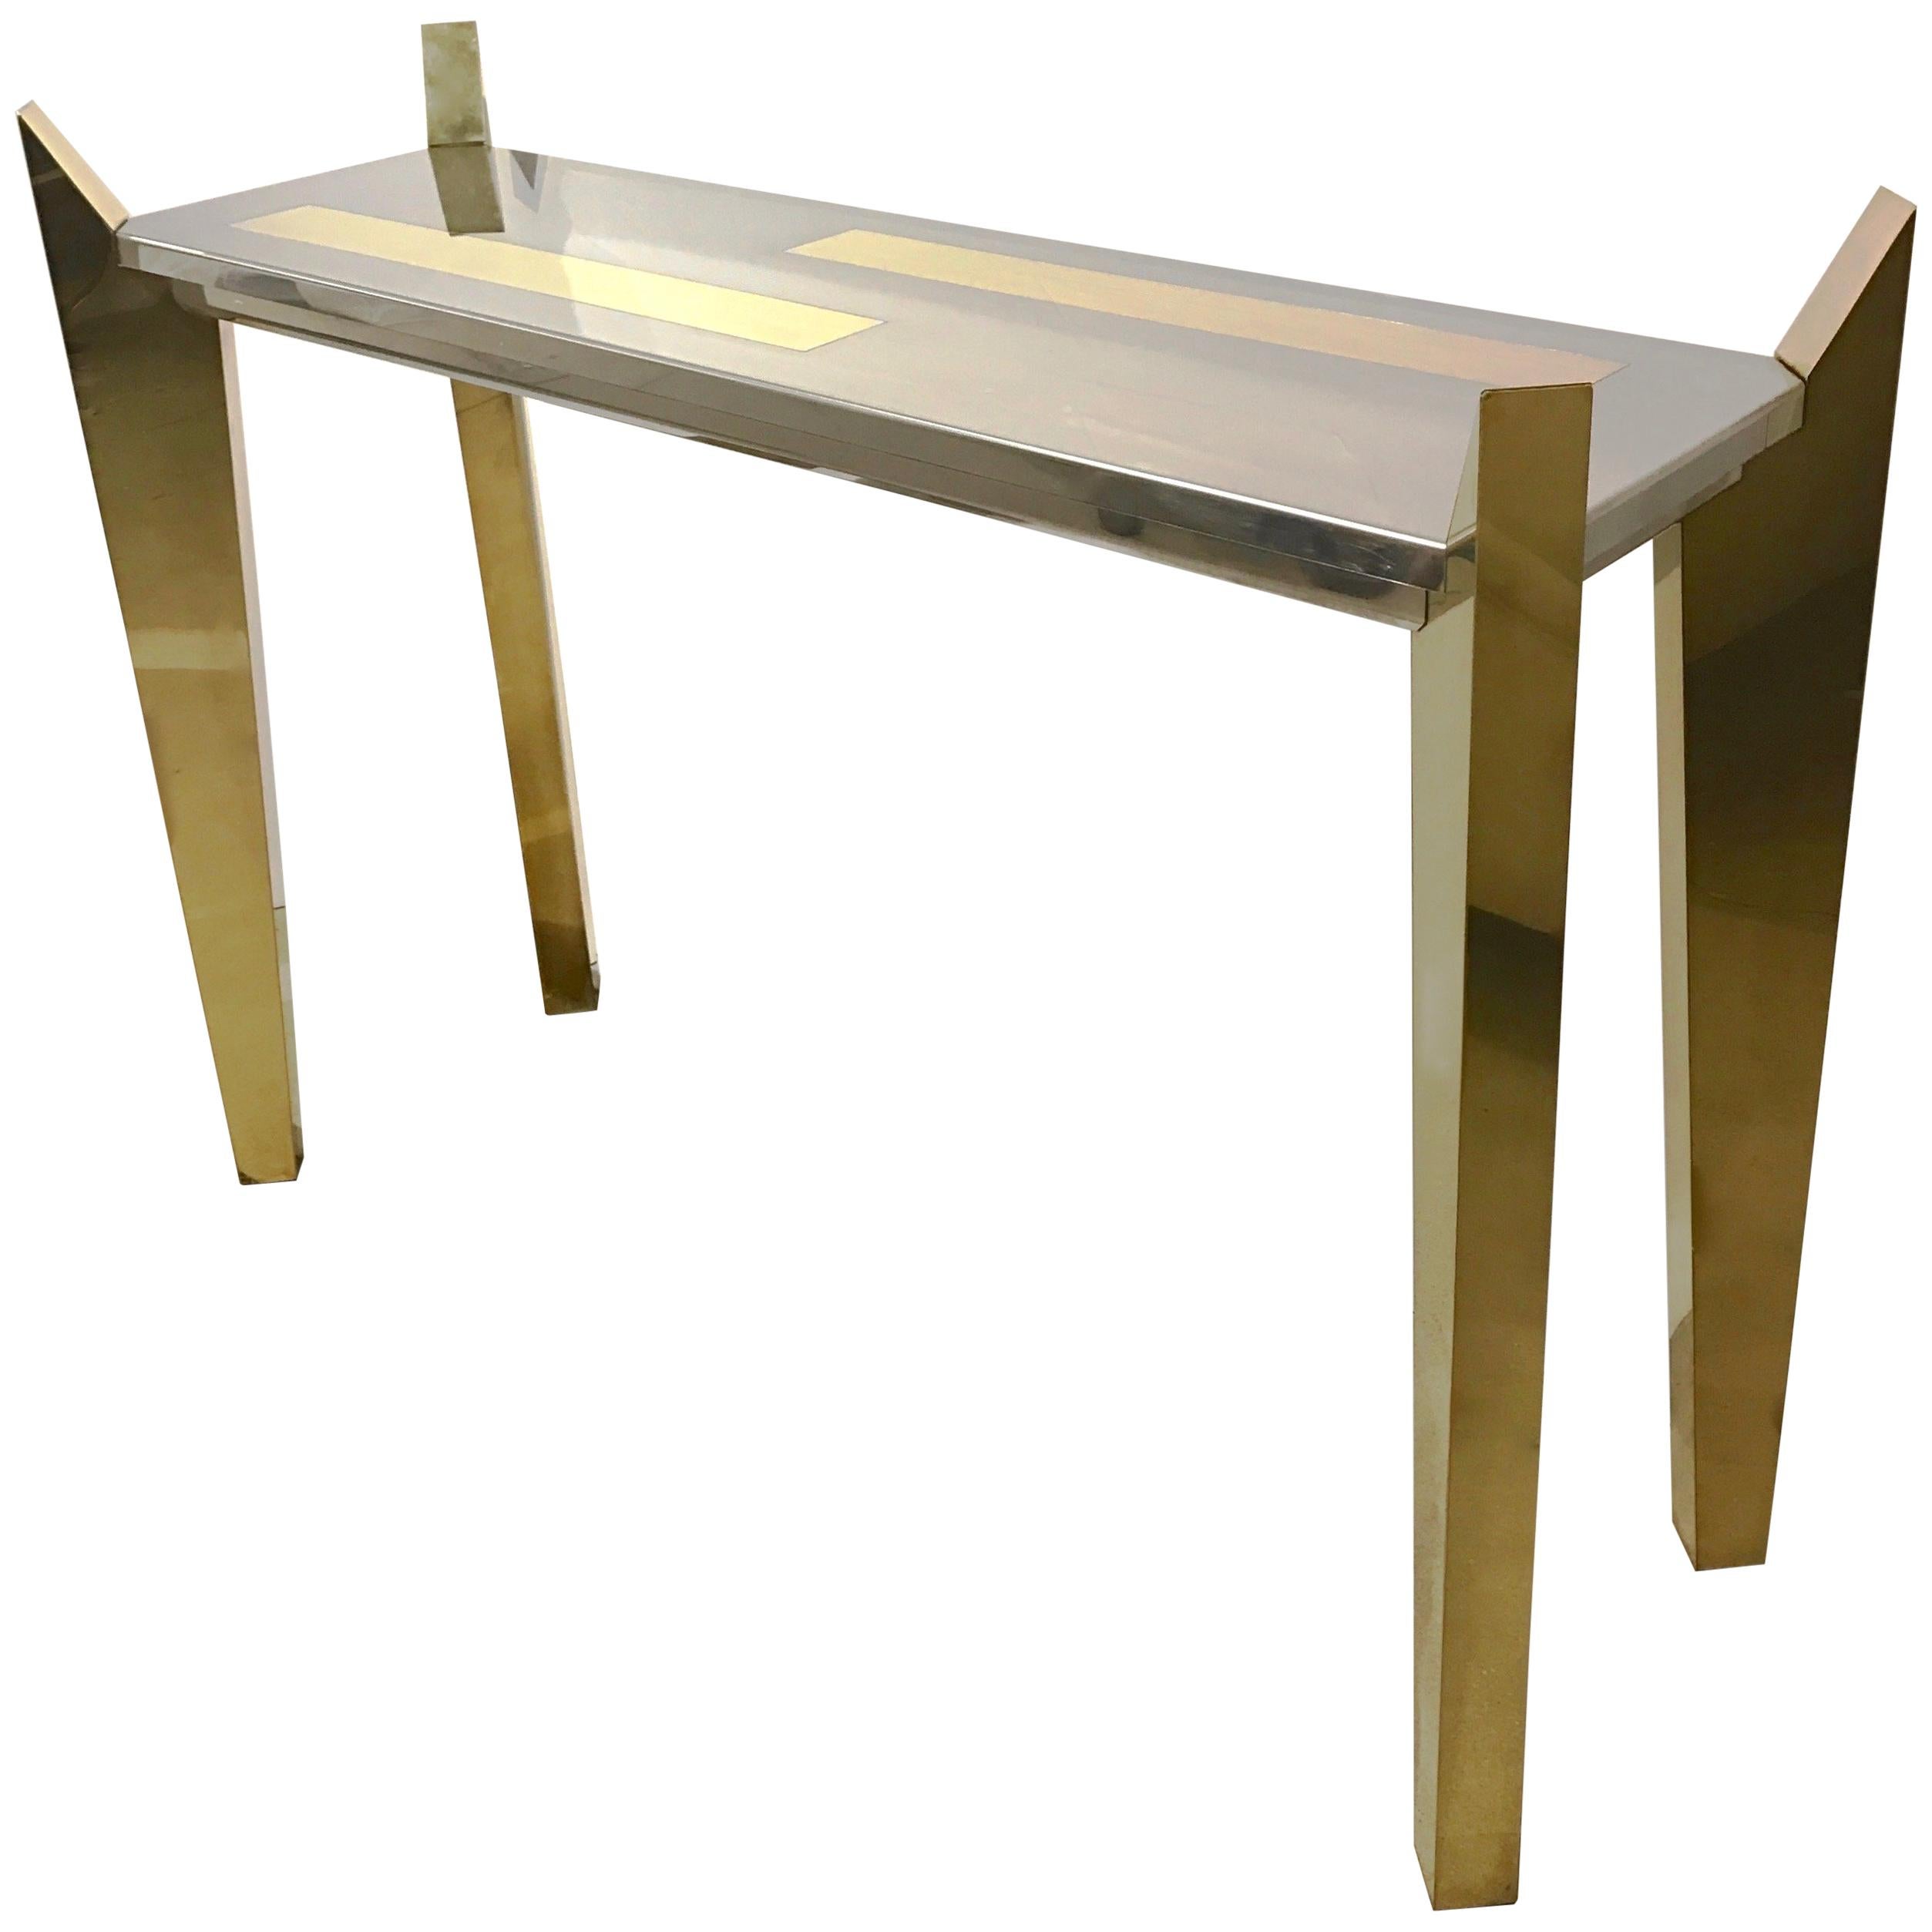 1970s Vintage Italian Brass and Nickel Console of Modern Graphic Design For Sale